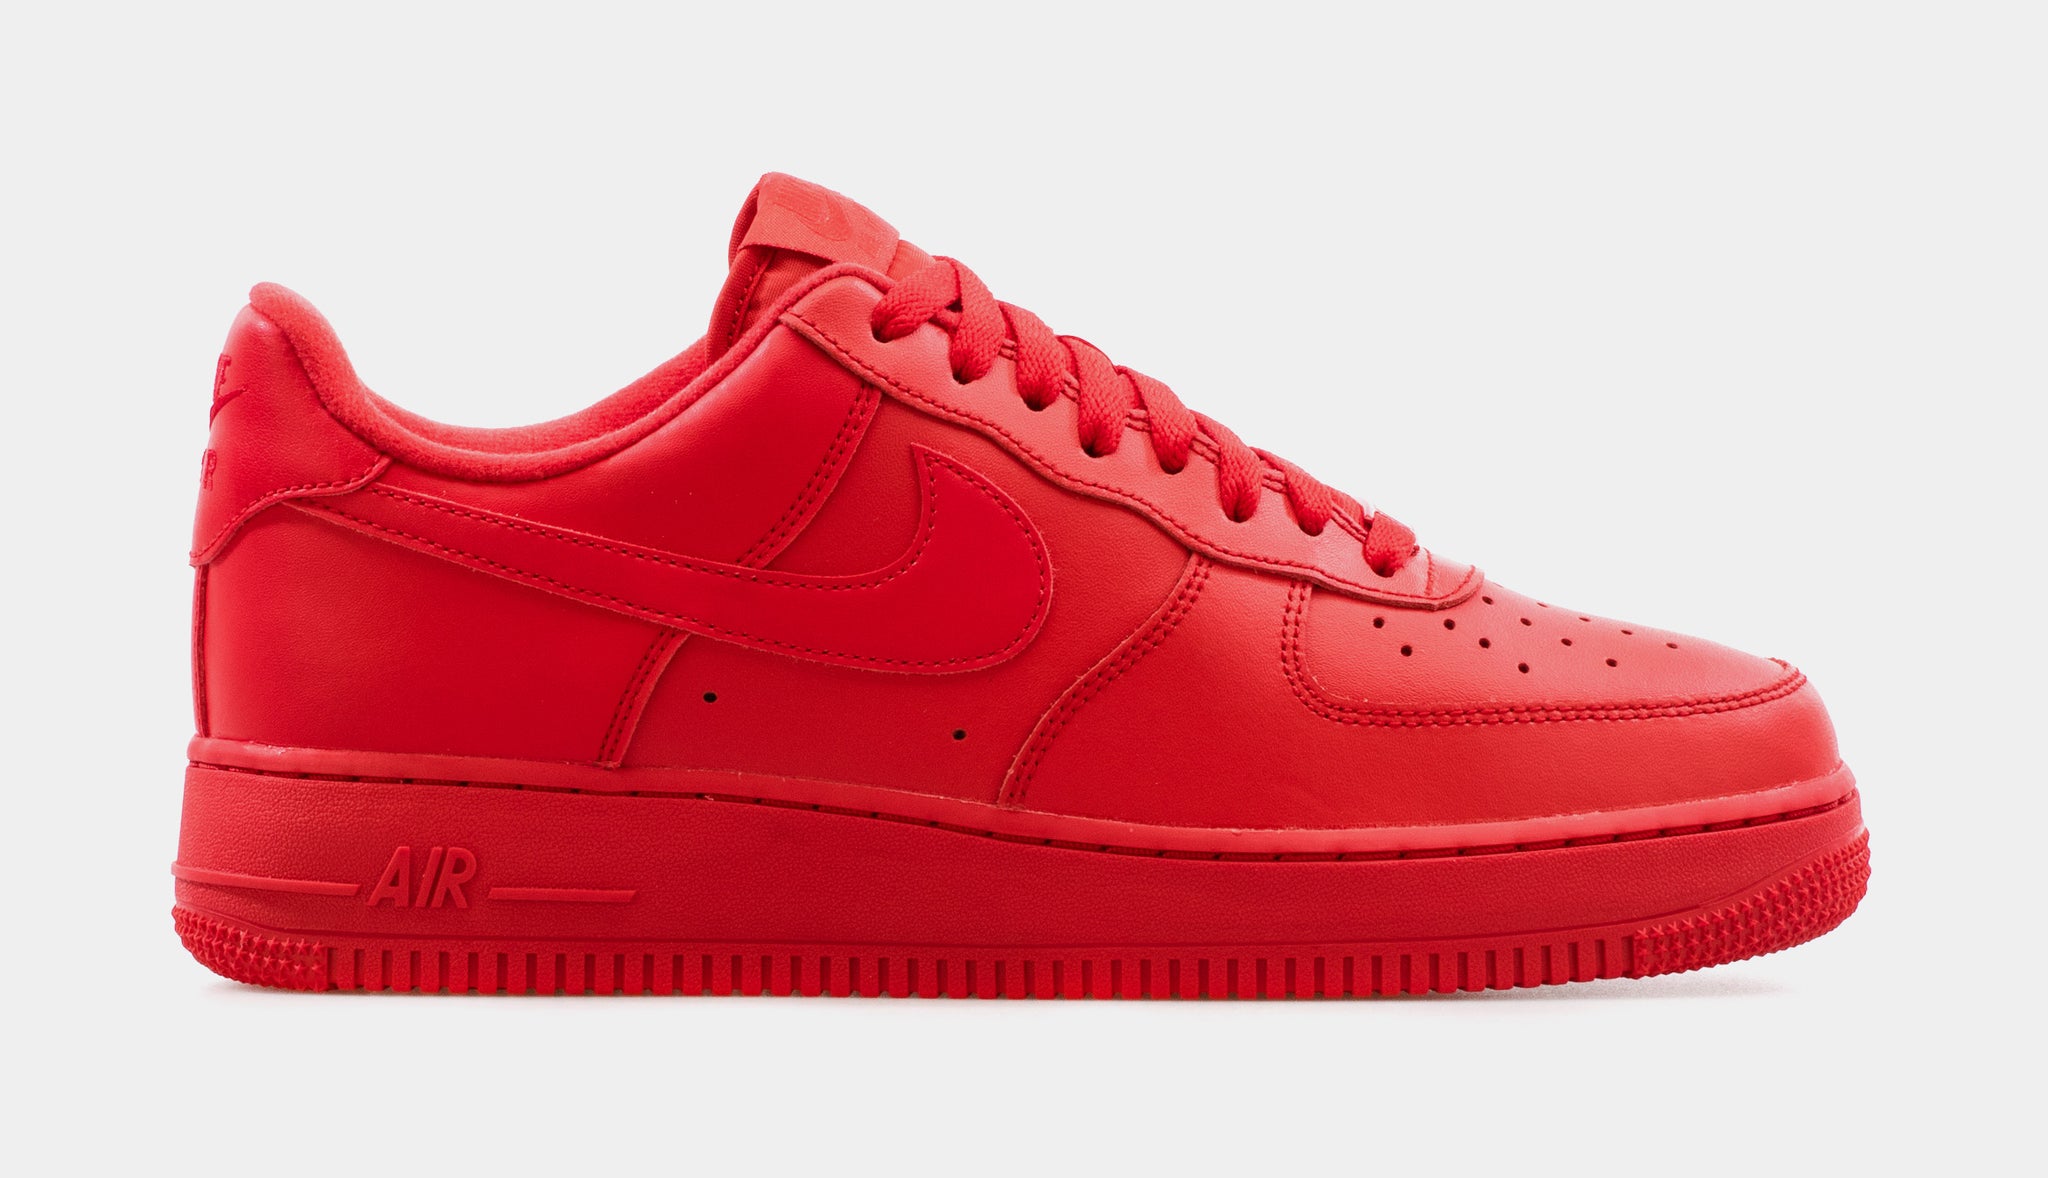 Nike Air Force 1 07 LV8 Mens Lifestyle Shoe Red CW6999-600 – Shoe